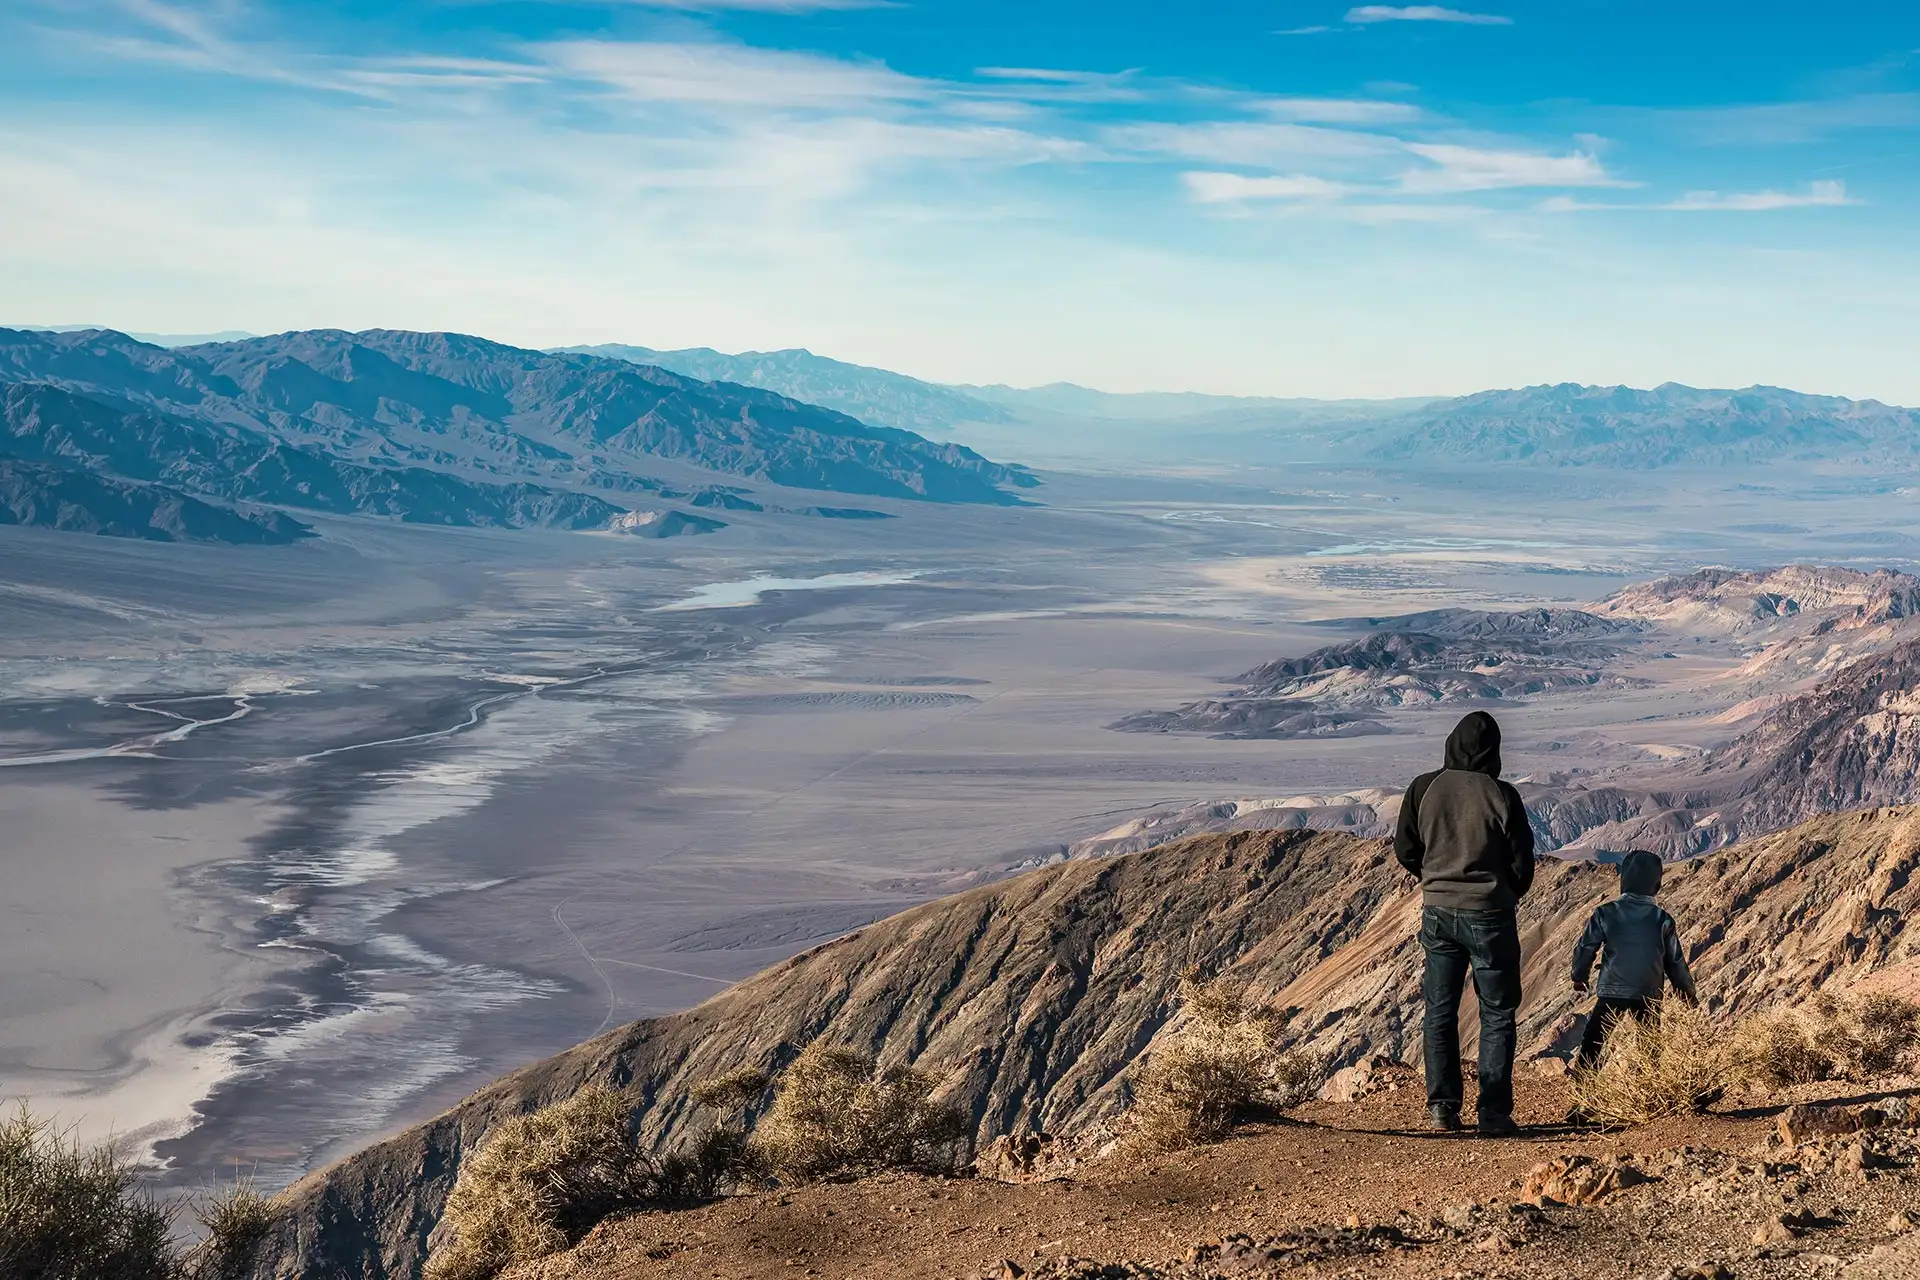 A father and son admiring views of Death Valley National Park from Dante's View in California